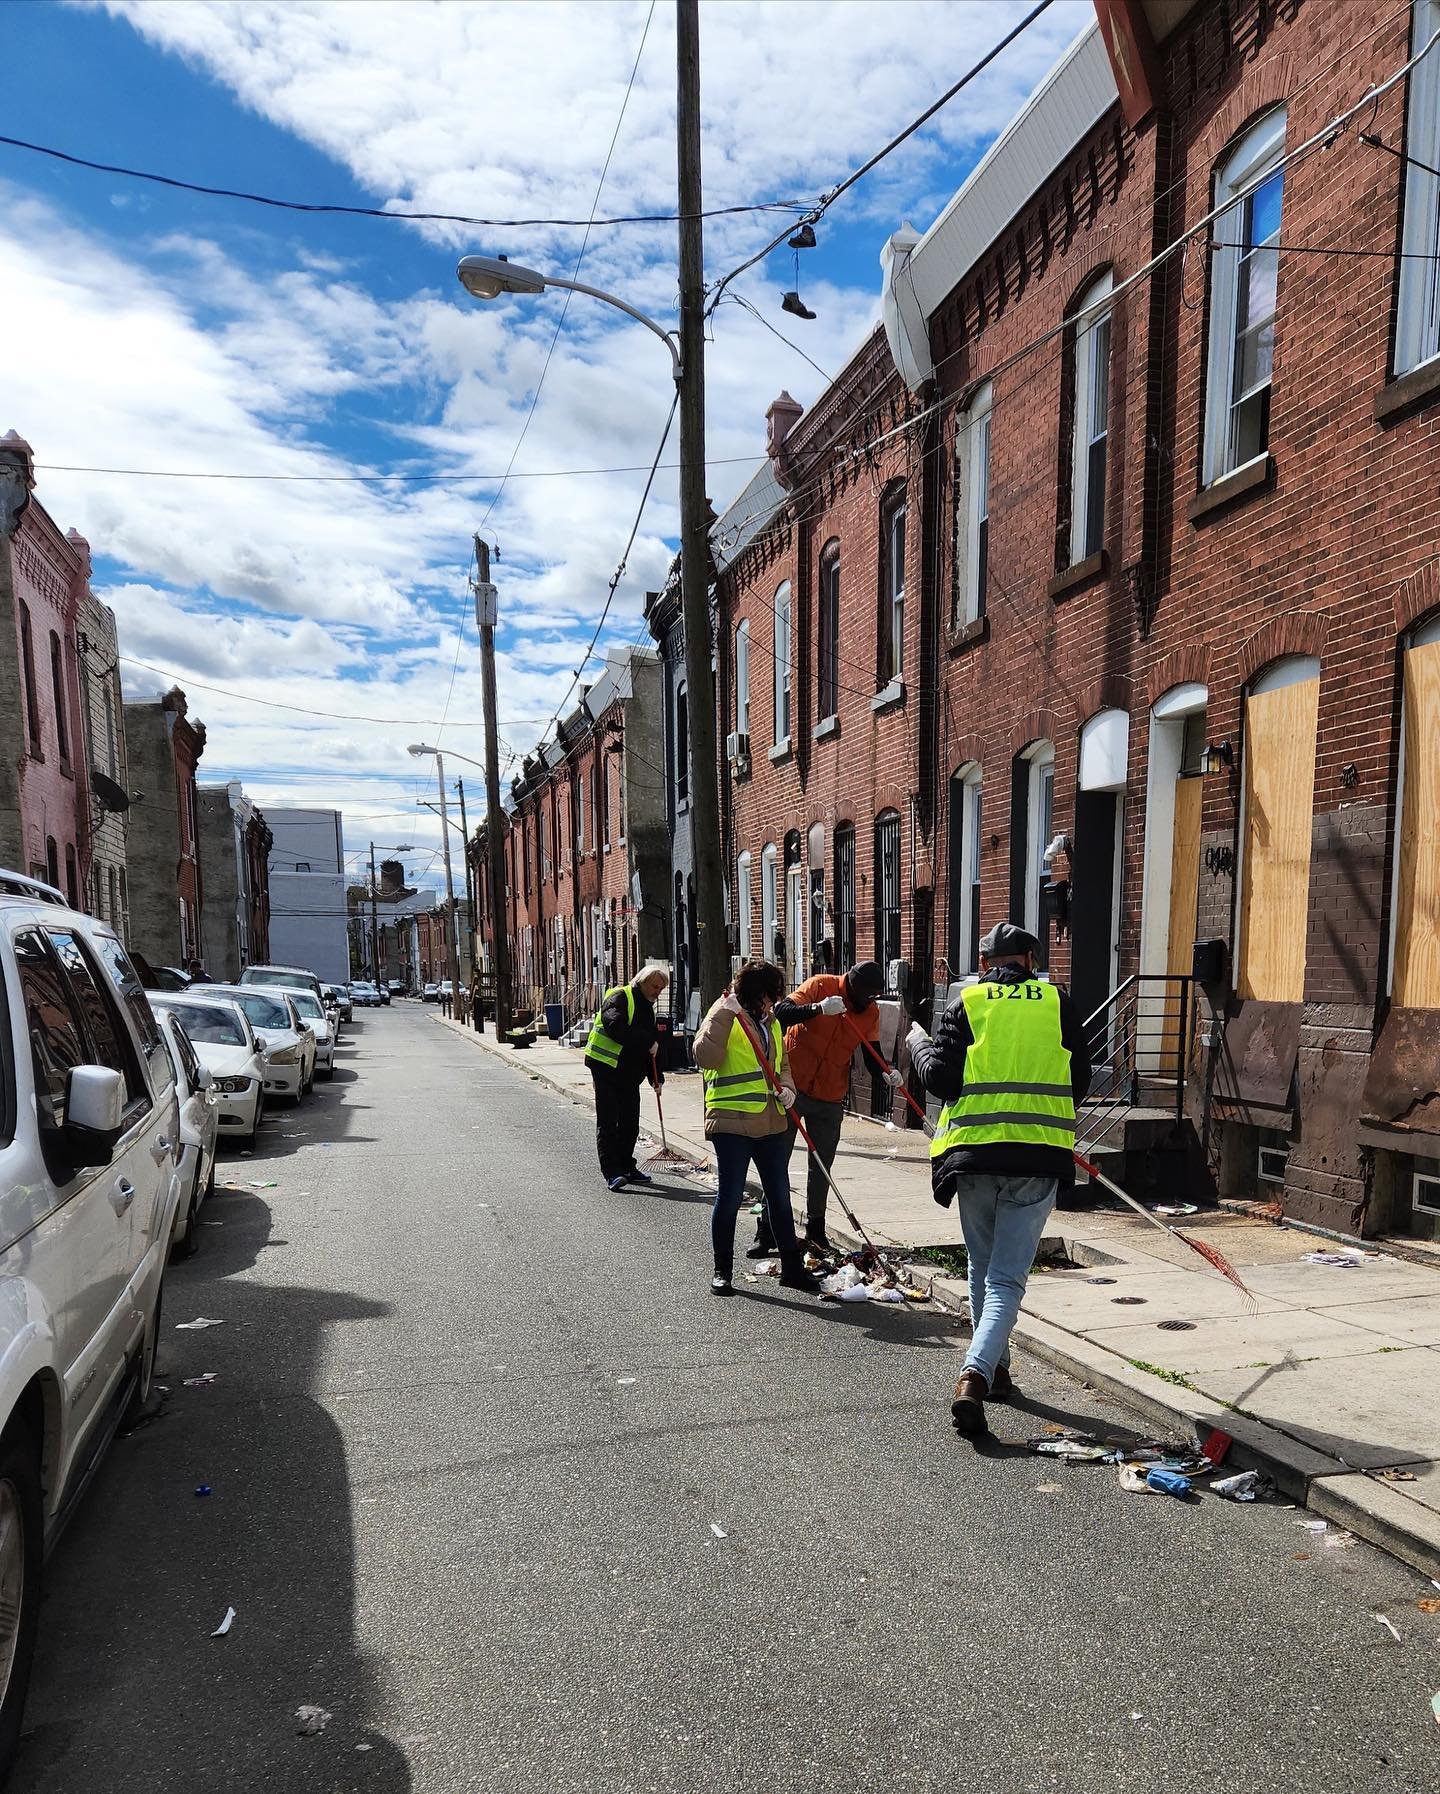 Did you know that SUPHR&rsquo;s Environmental Services team pays community members to help clean up neighborhoods? Block2Block is a city-wide program that pays participants $50 a day through a same-day-pay work initiative. Participants engage in work